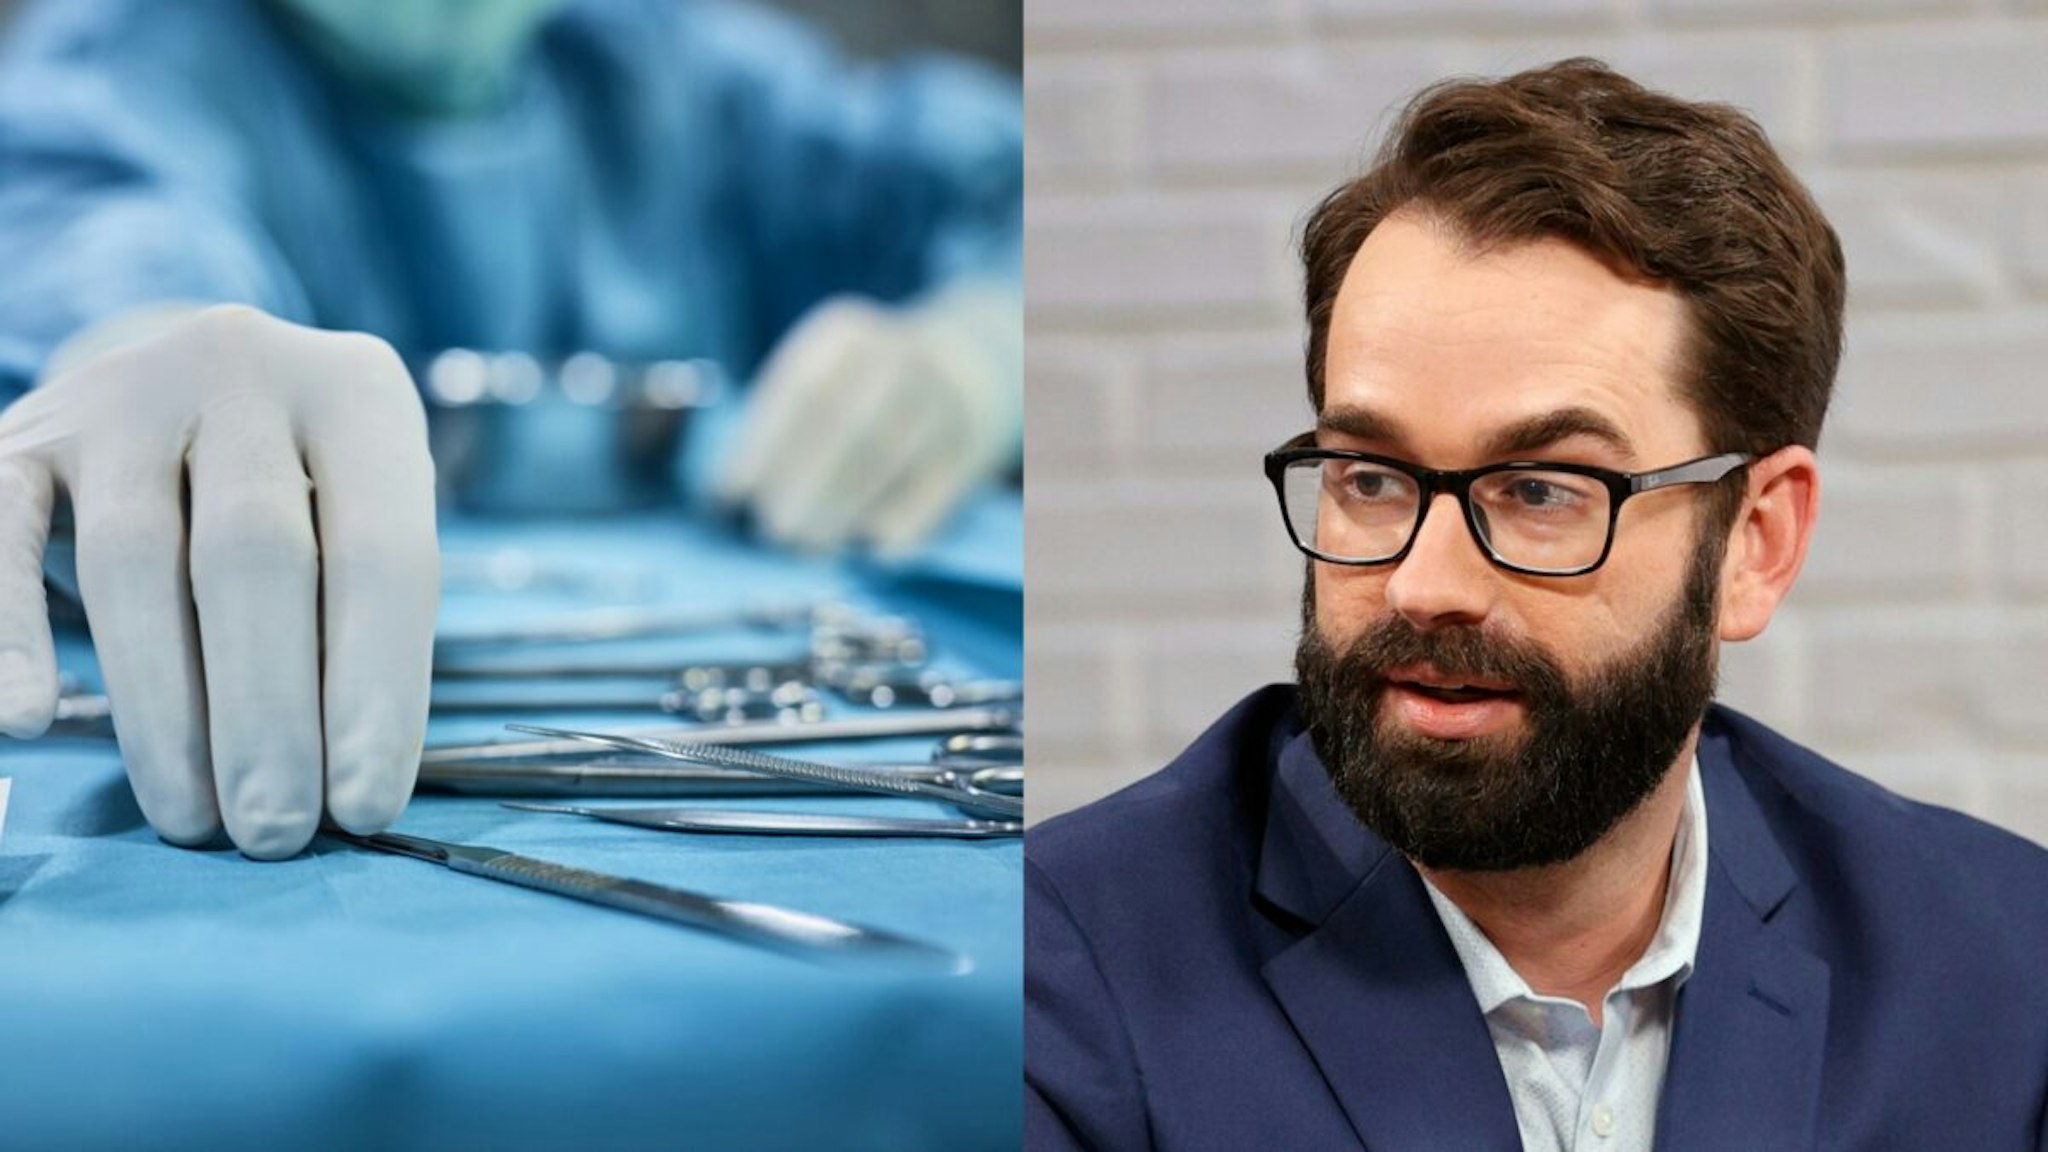 Surgeon picking up surgical tool from tray. Surgeon is preparing for surgery in operating room. He is in a hospital./AUGUST 09: Matt Walsh visits the "Candace" Hosted By Candace Owens show on August 09, 2021 in Nashville, Tennessee. The show will air on Tuesday, August 10, 2021.